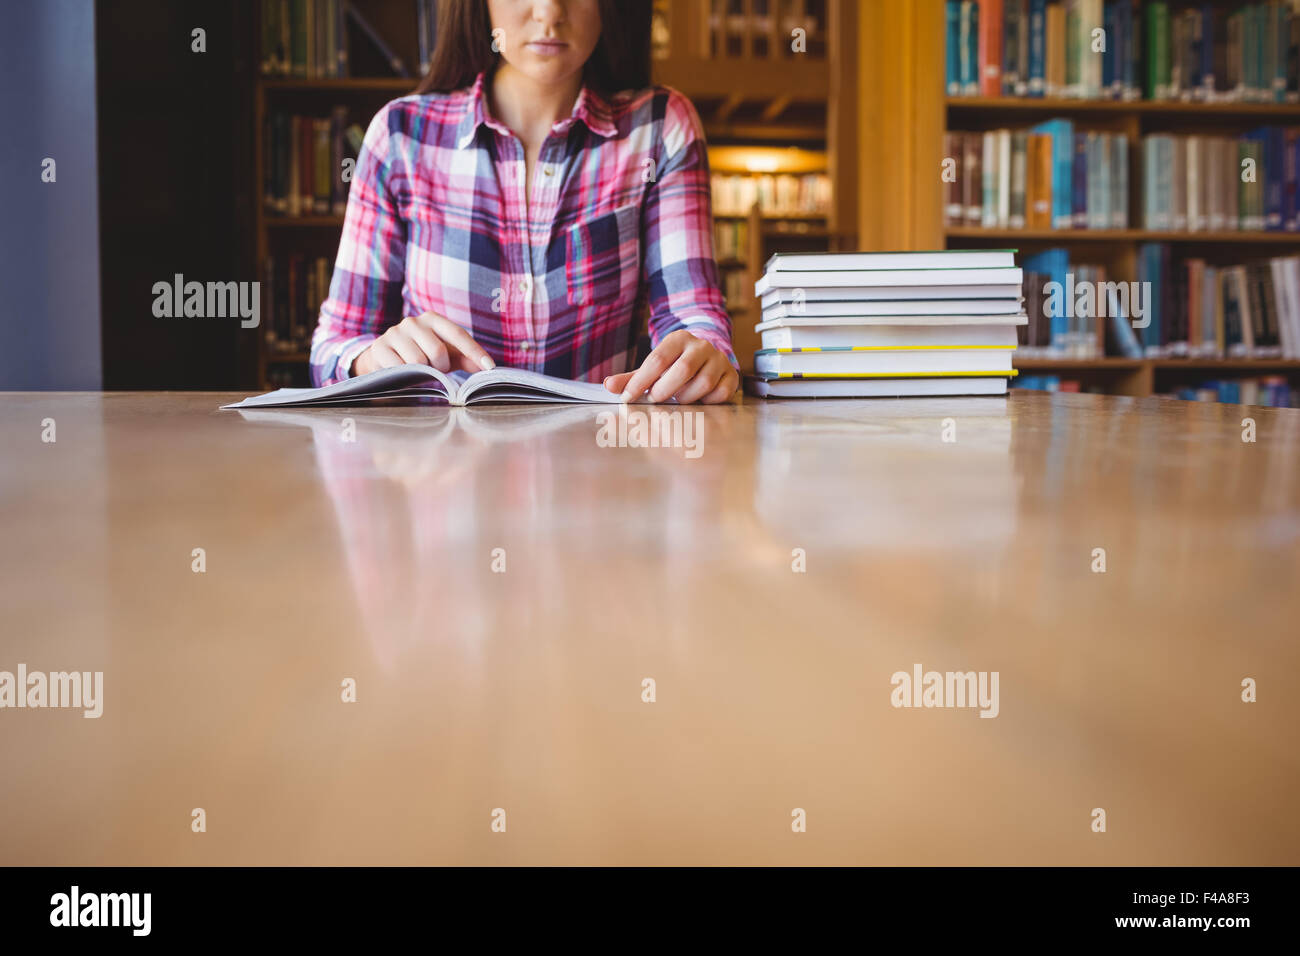 Mid section of female student studying Stock Photo